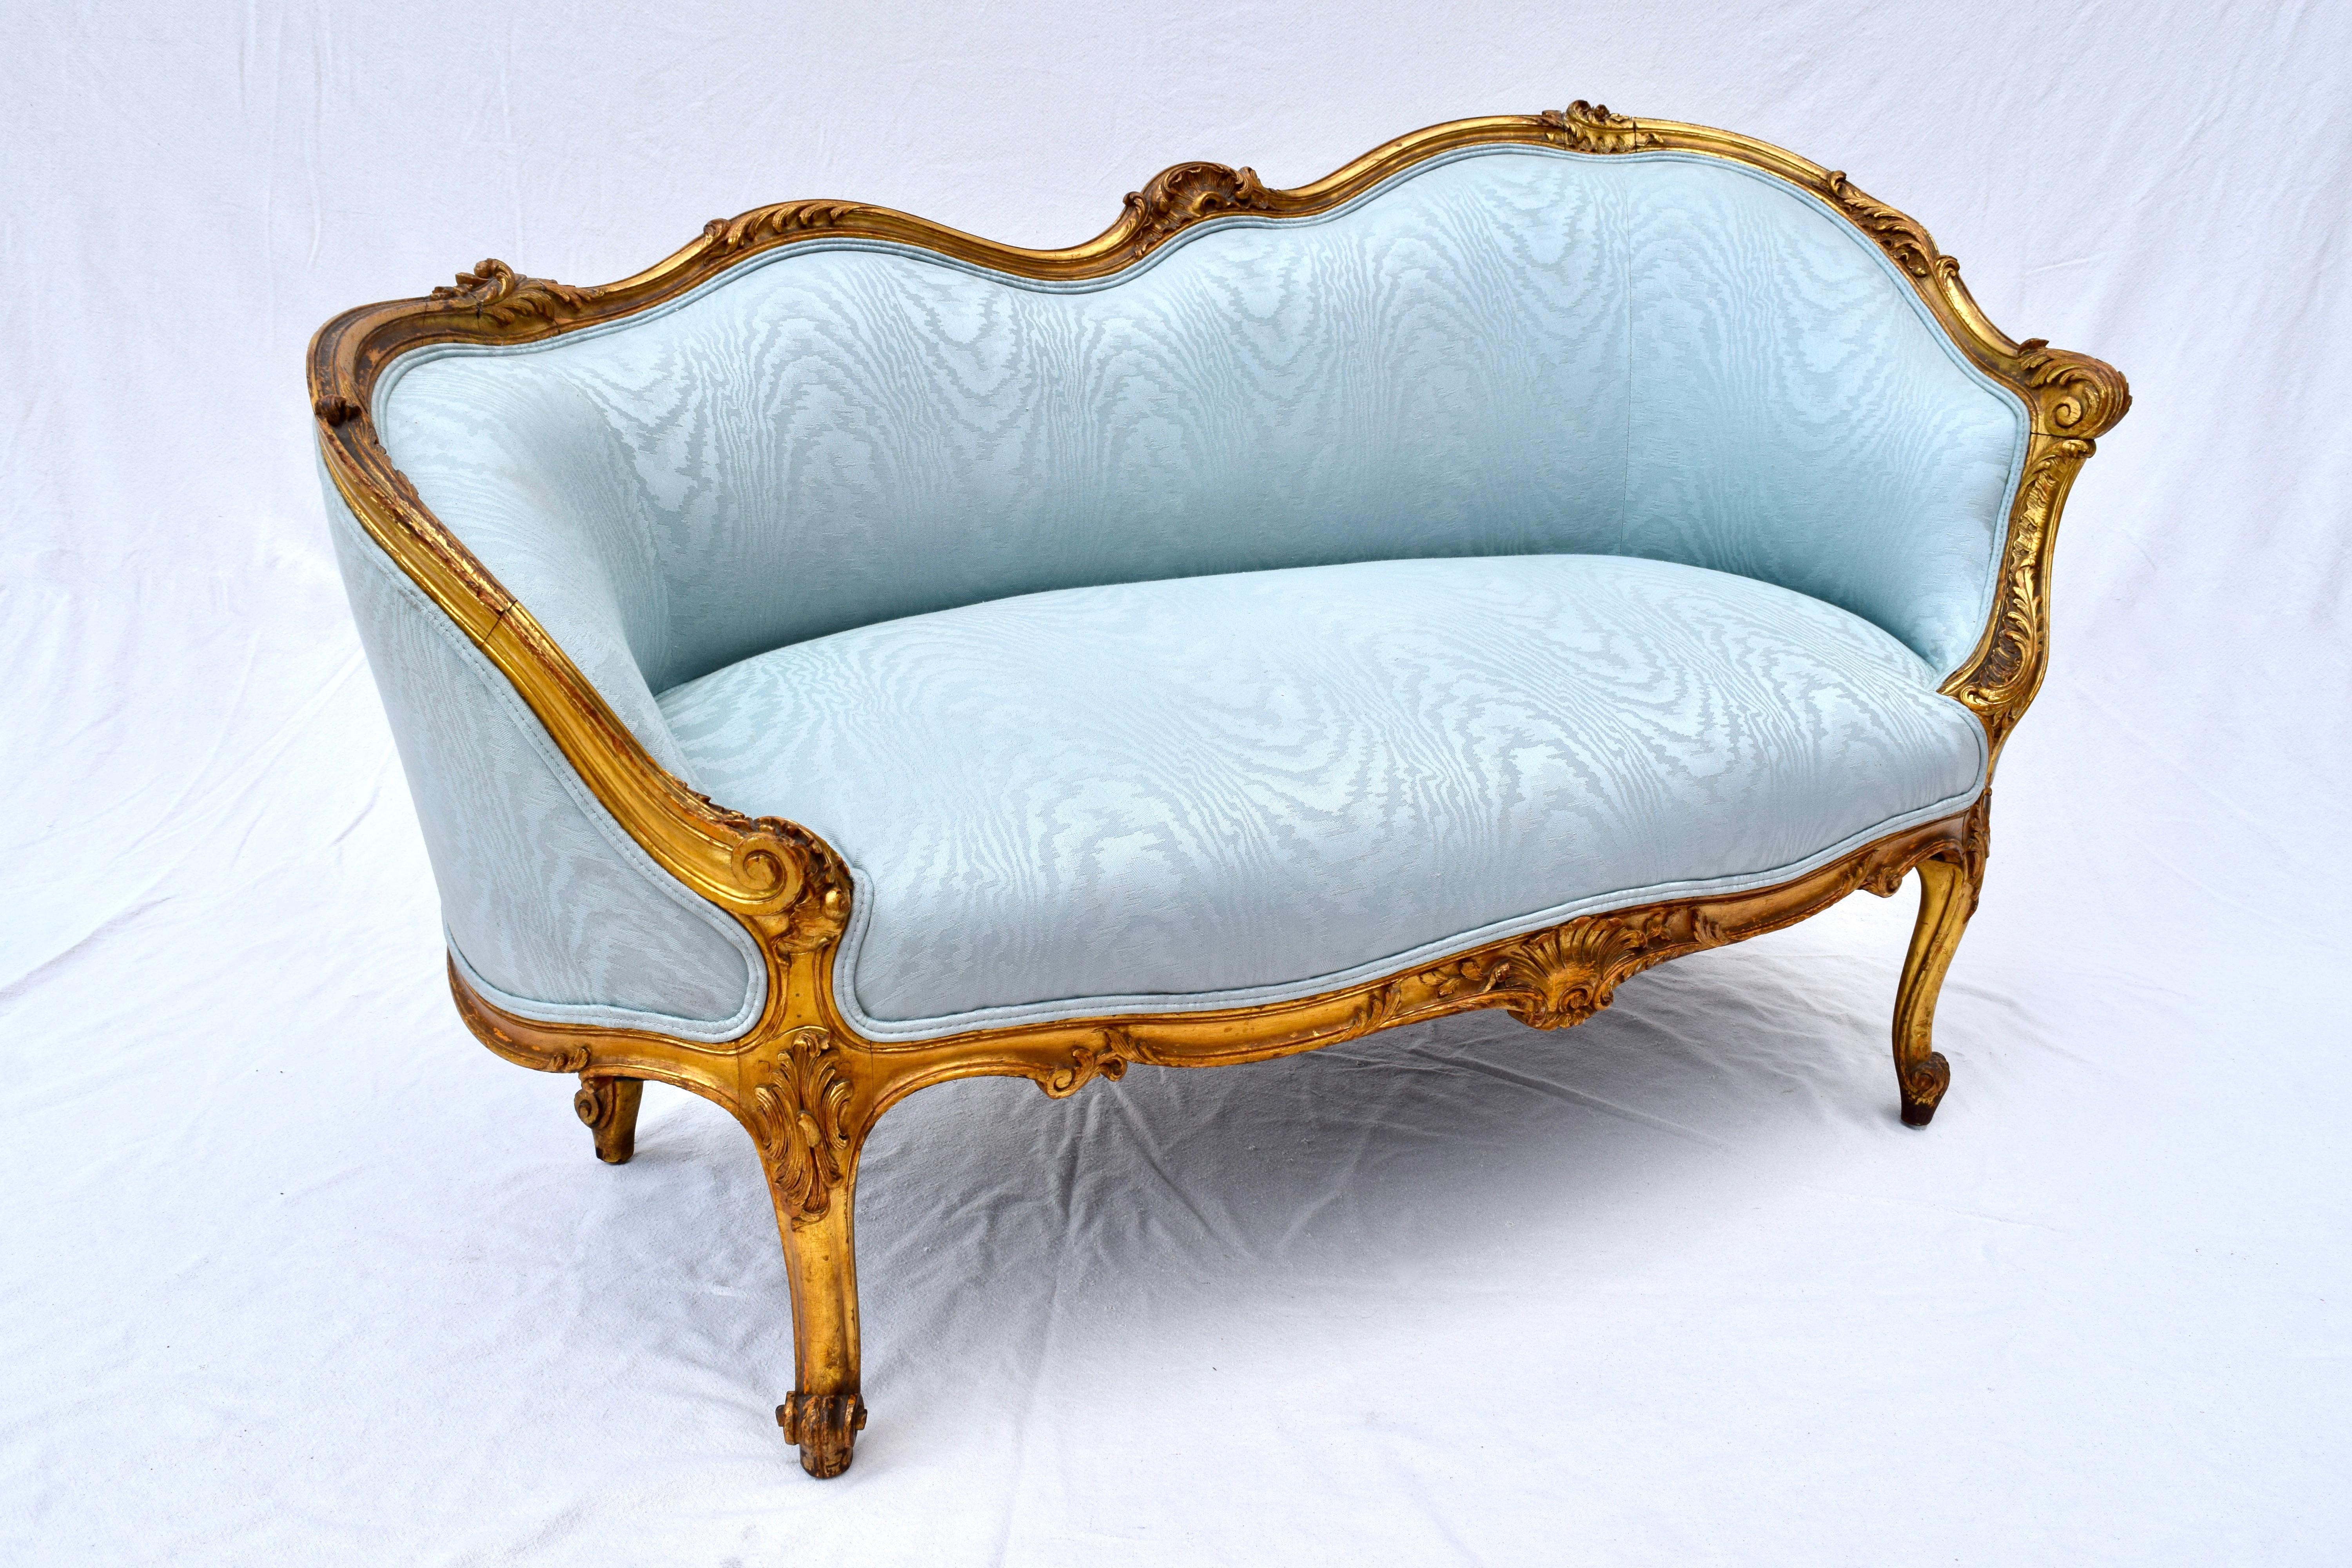 A graceful gold gilt and hand carved French Meridienne, settee or loveseat in the Louis XV style. Very solid construction.
 